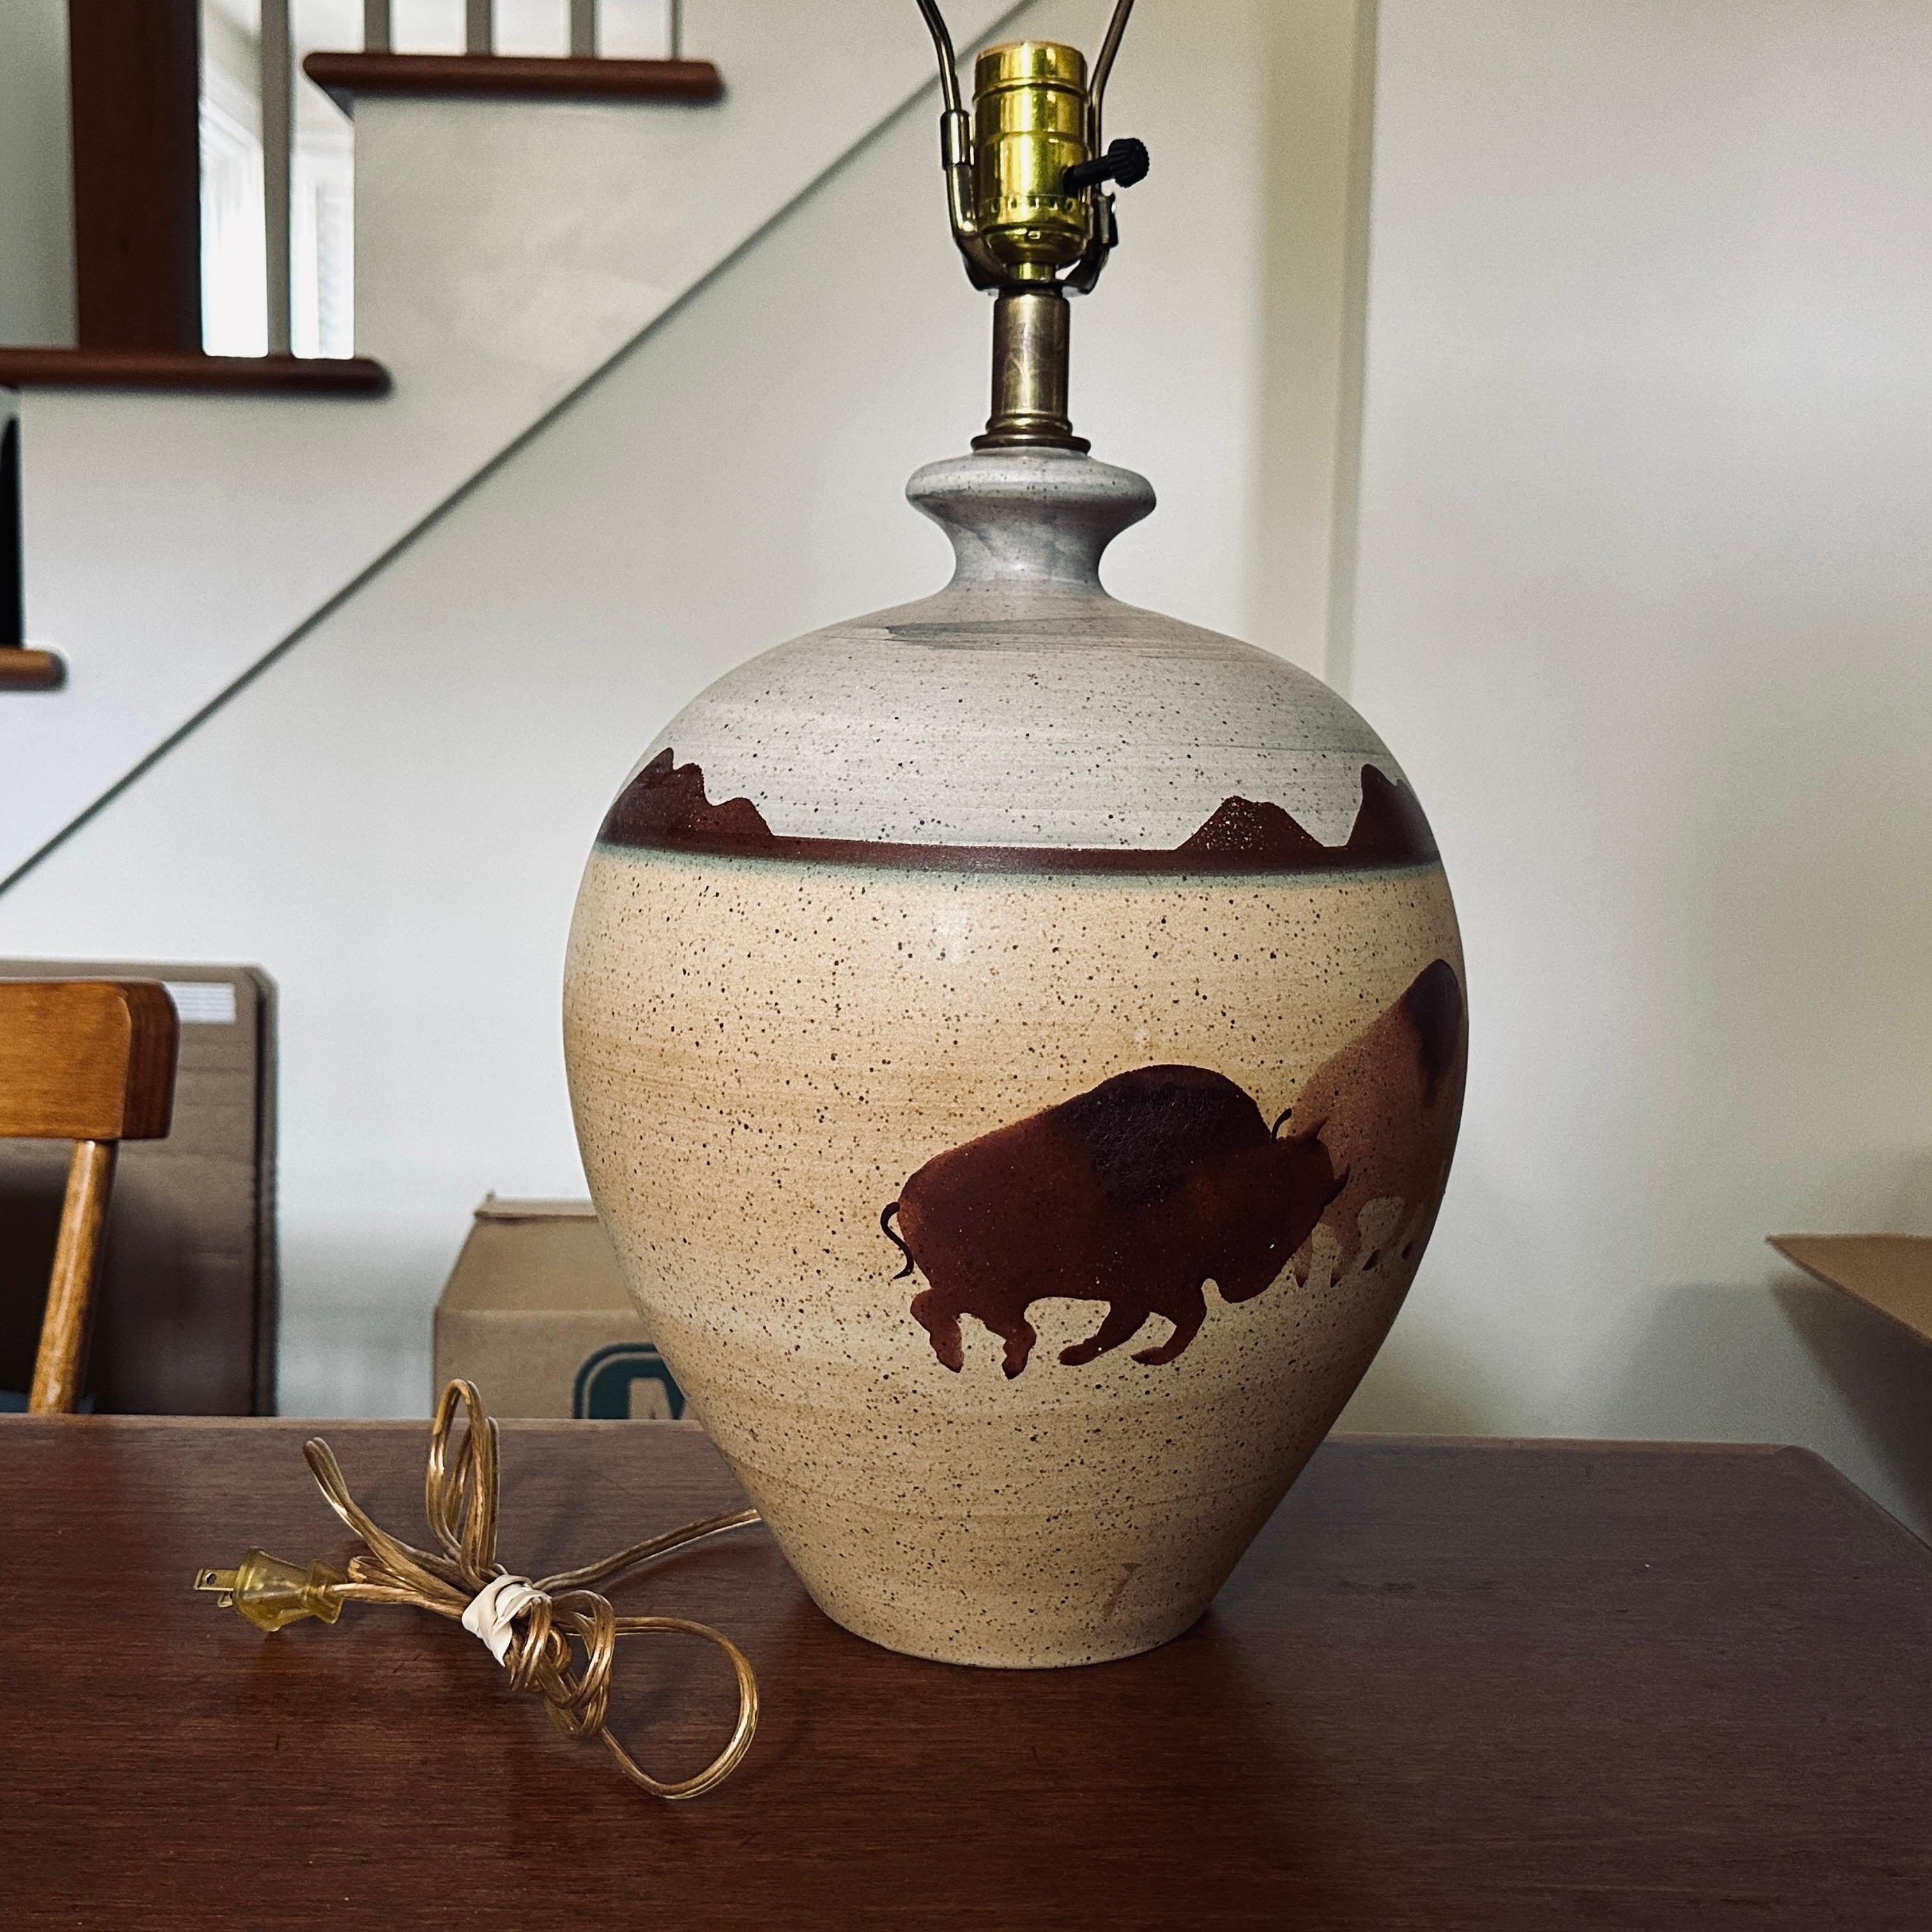 20th Century Western Landscape Bison Lamp by California Ceramic Designers Inc. For Sale